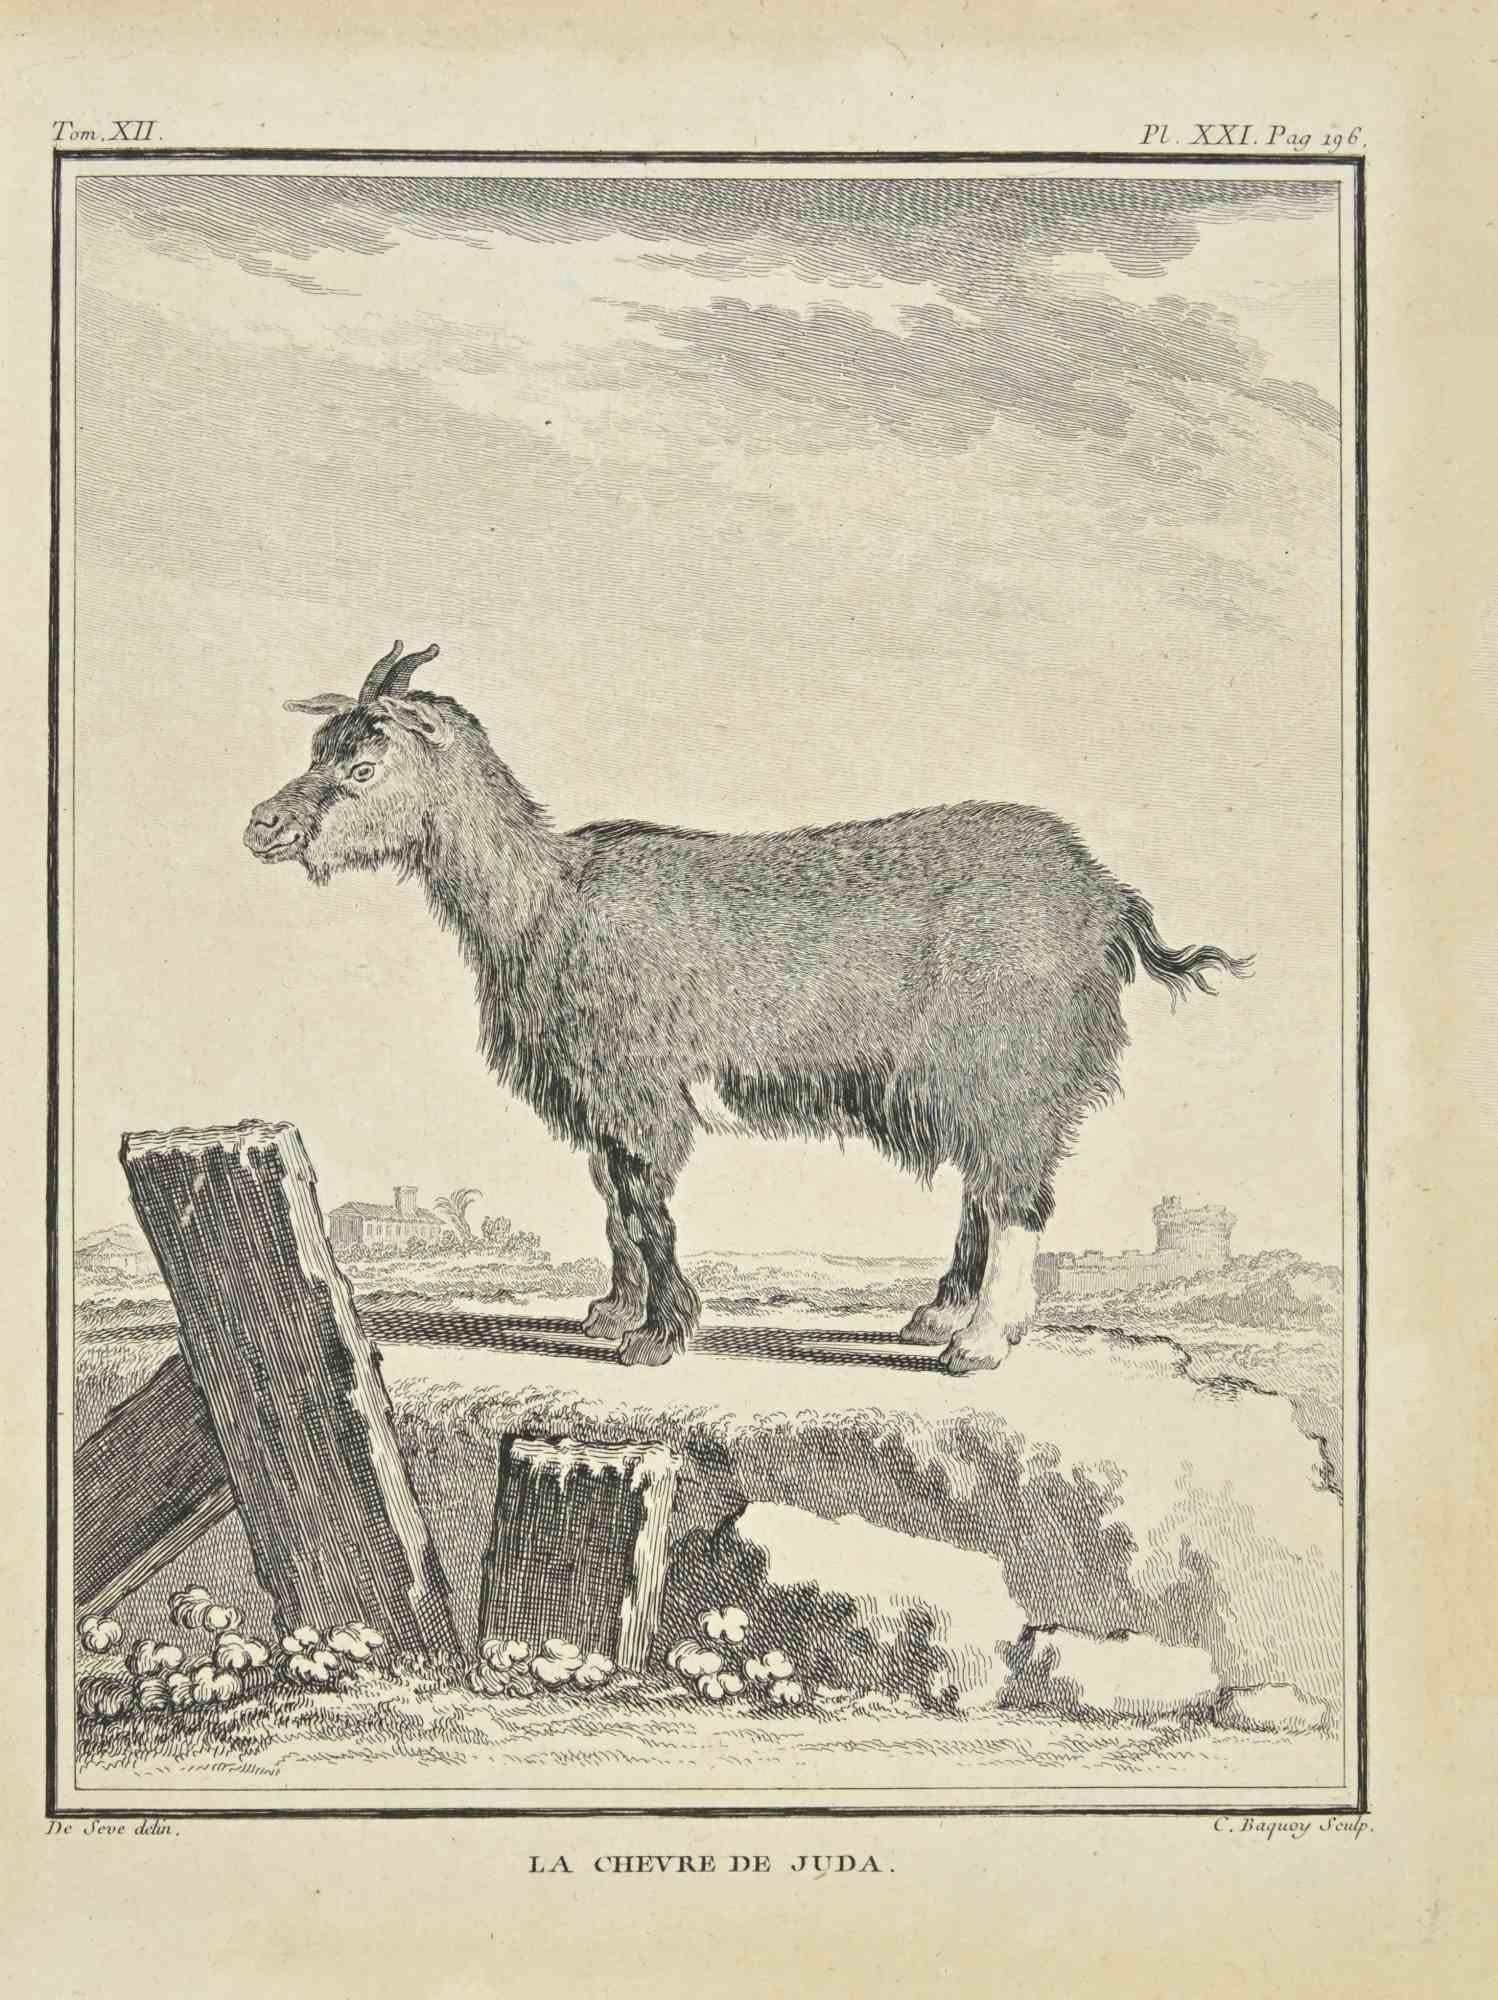 La Chevre De Juda is an etching realized by Jean Charles Baquoy in 1771.

It belongs to the suite "Histoire Naturelle de Buffon".

The Artist's signature is engraved lower right.

Good conditions.